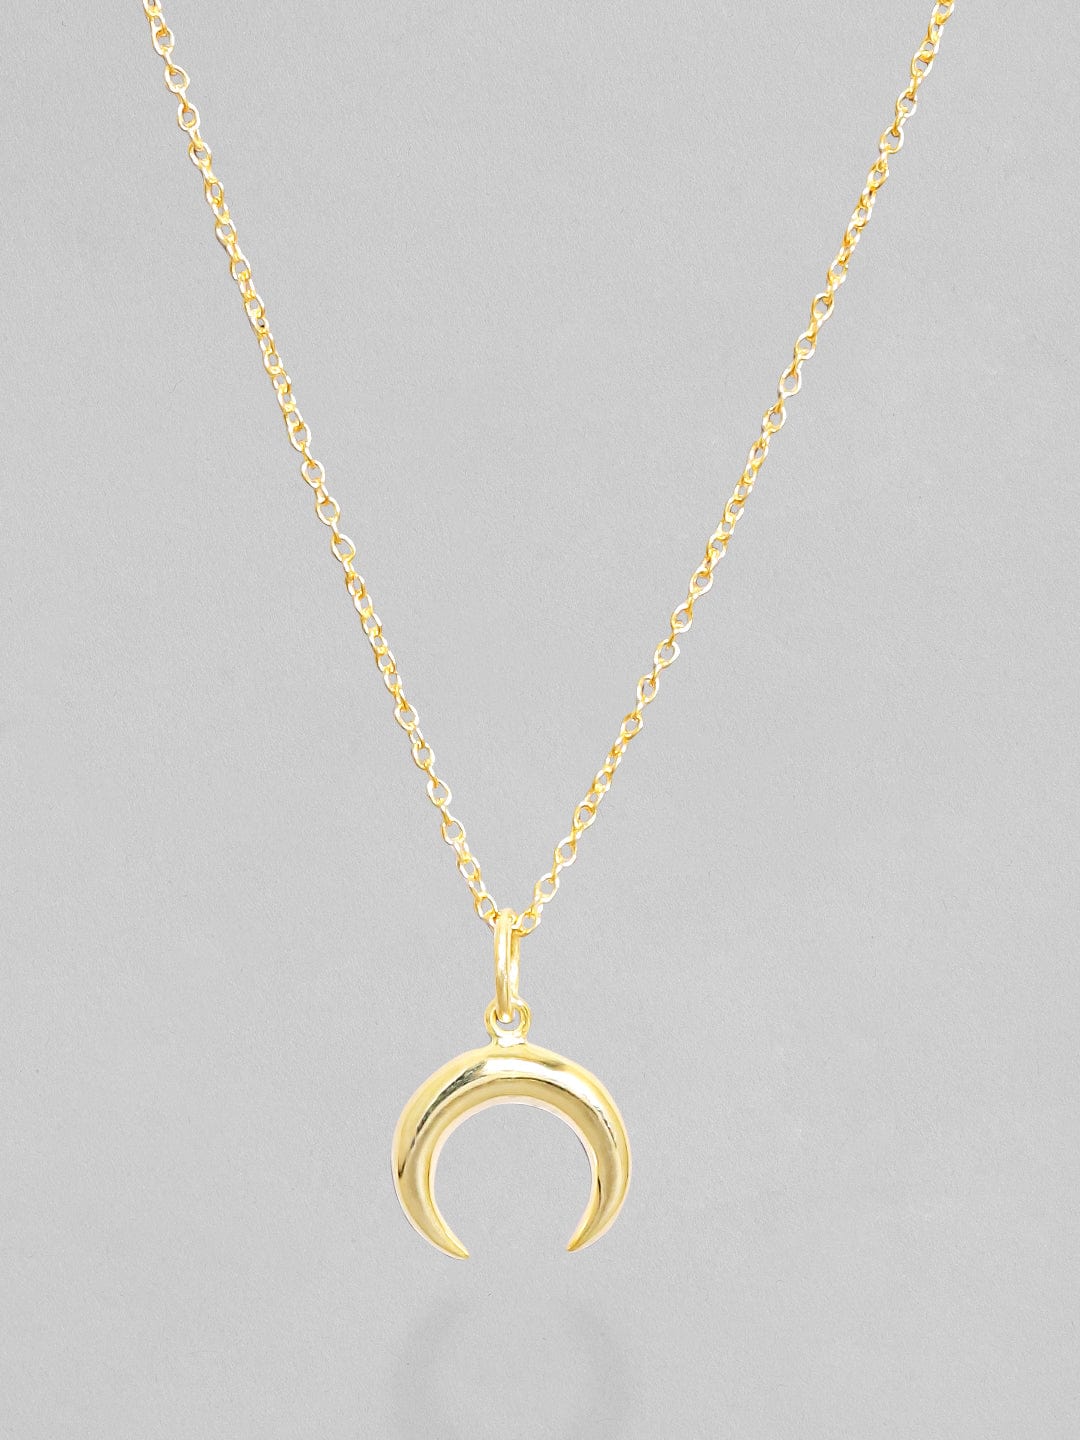 HADIA GERMAN SILVER CRESCENT MOON PENDANT NECKLACE Gold-plated Plated Metal  Necklace Price in India - Buy HADIA GERMAN SILVER CRESCENT MOON PENDANT  NECKLACE Gold-plated Plated Metal Necklace Online at Best Prices in